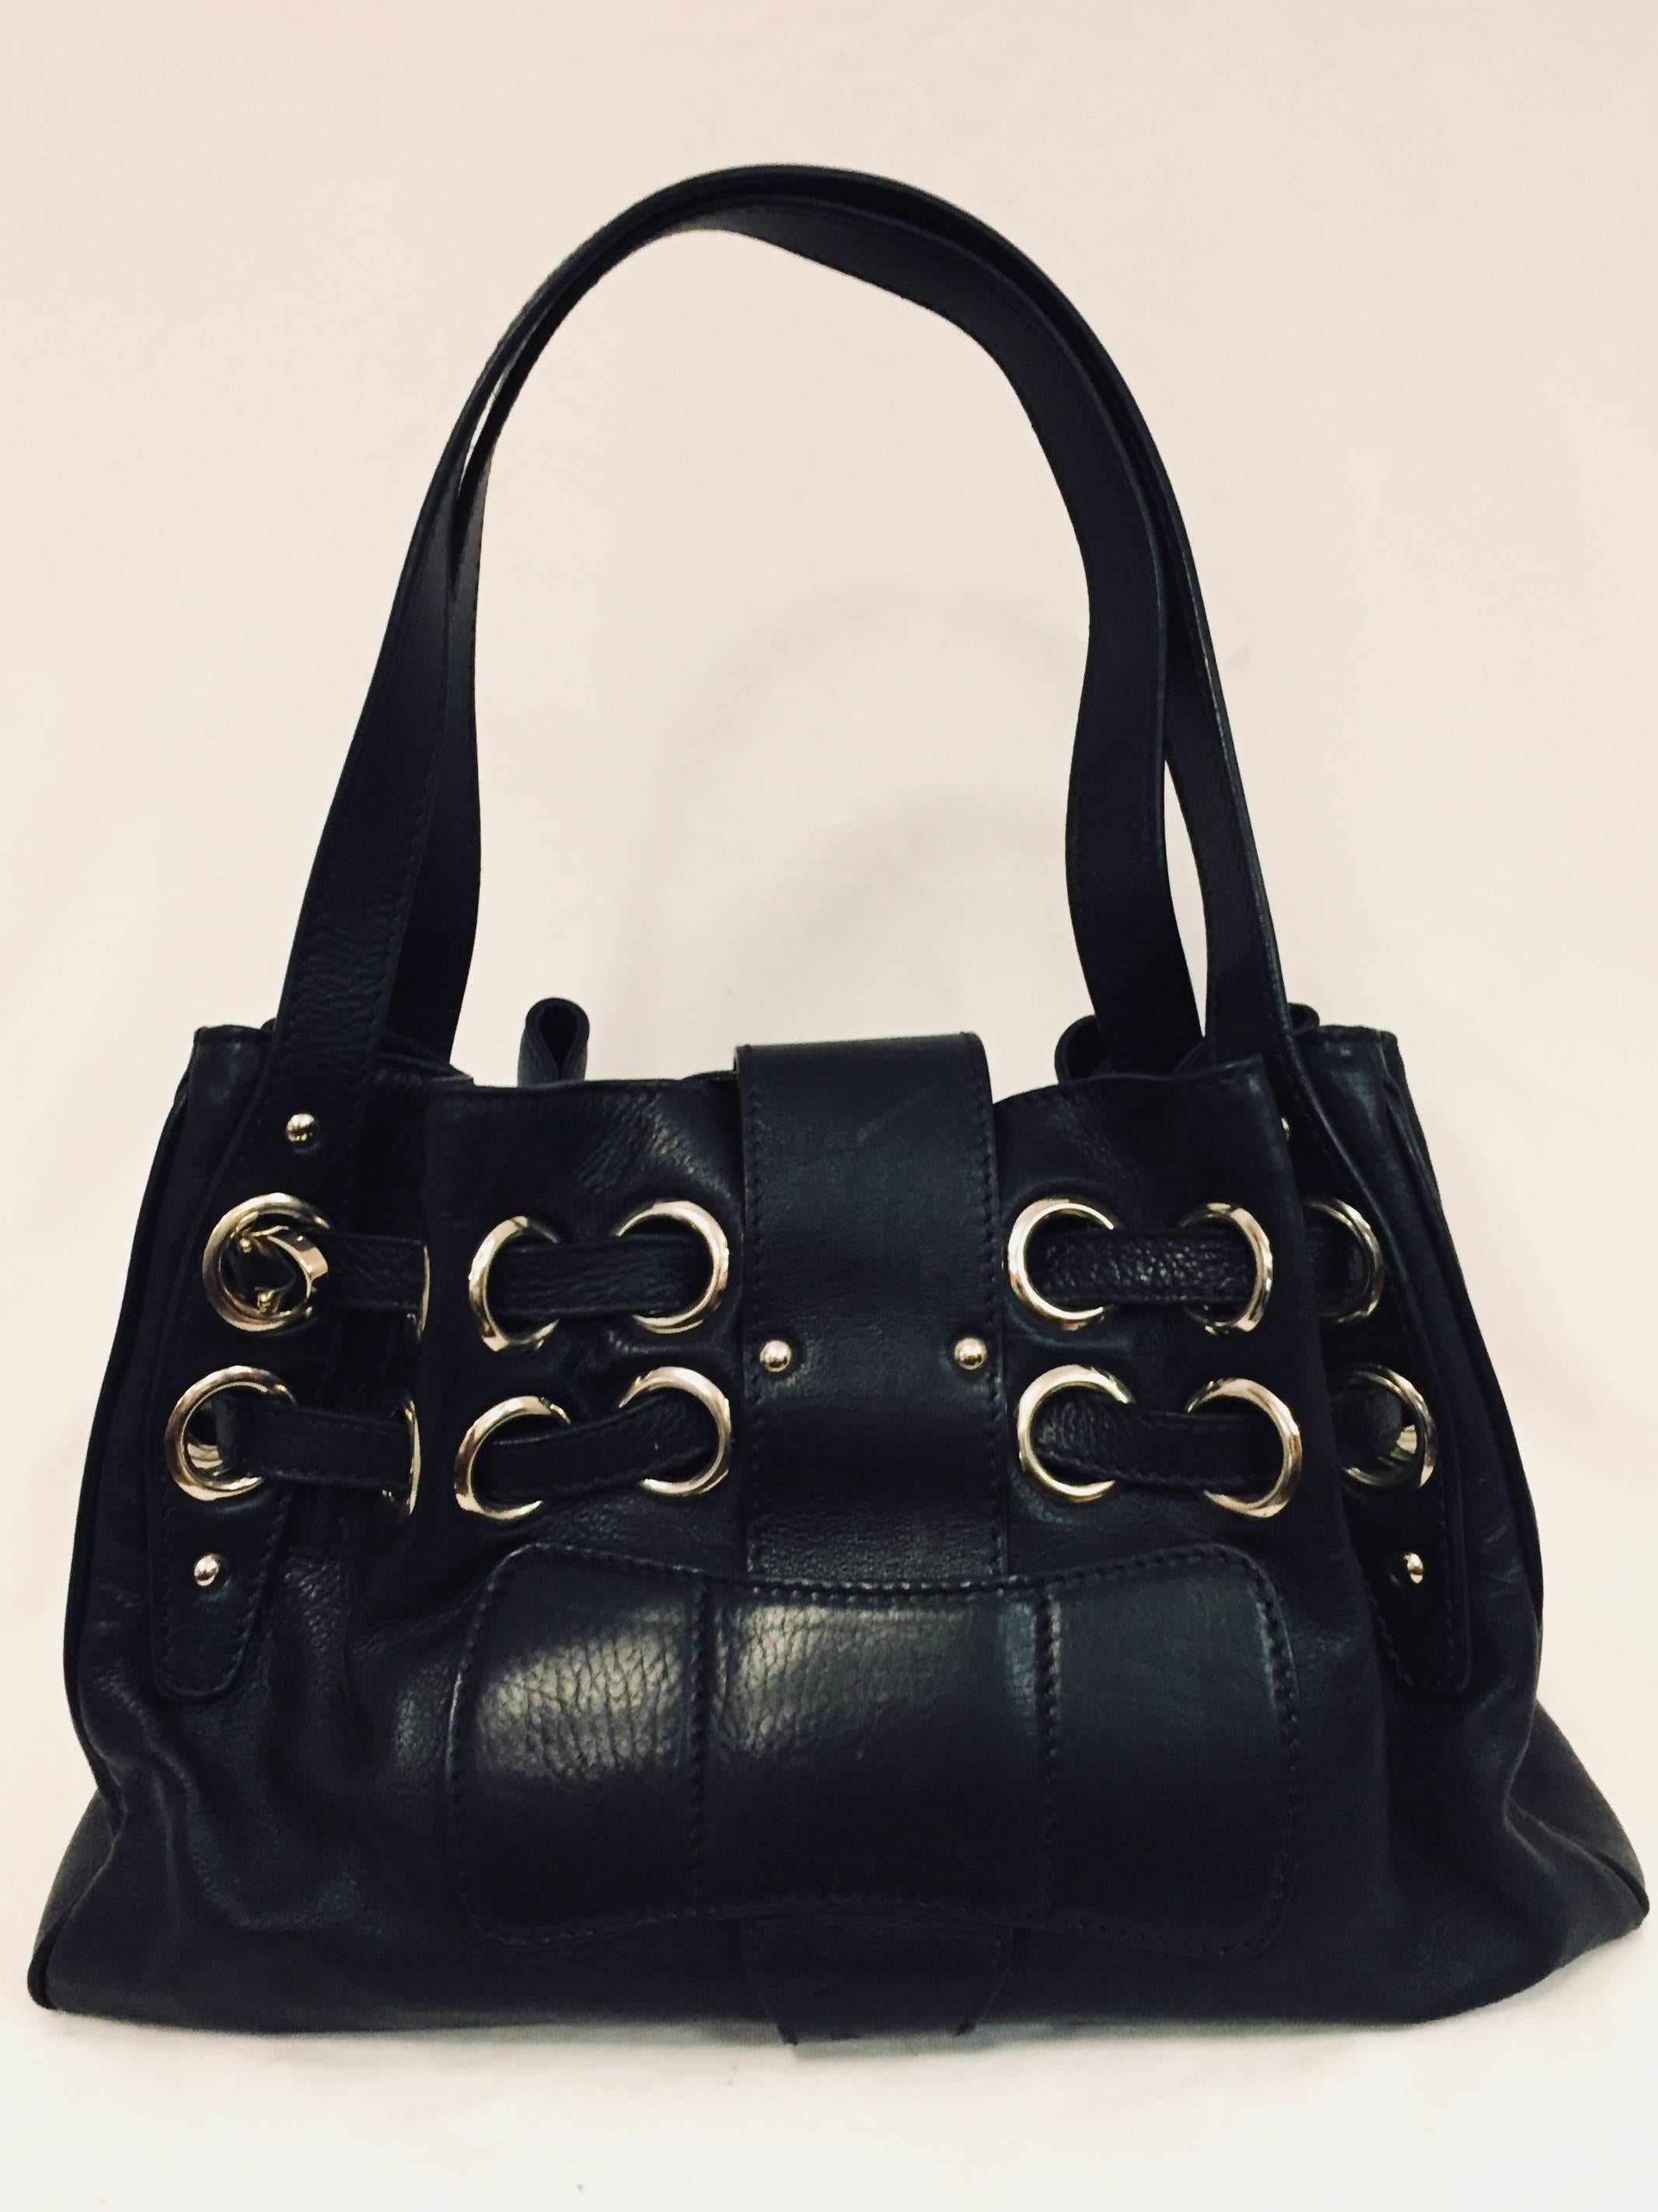 Jimmy Choo Black Leather Gathered Shoulder Bucket Bag With Grommets In Good Condition For Sale In Palm Beach, FL